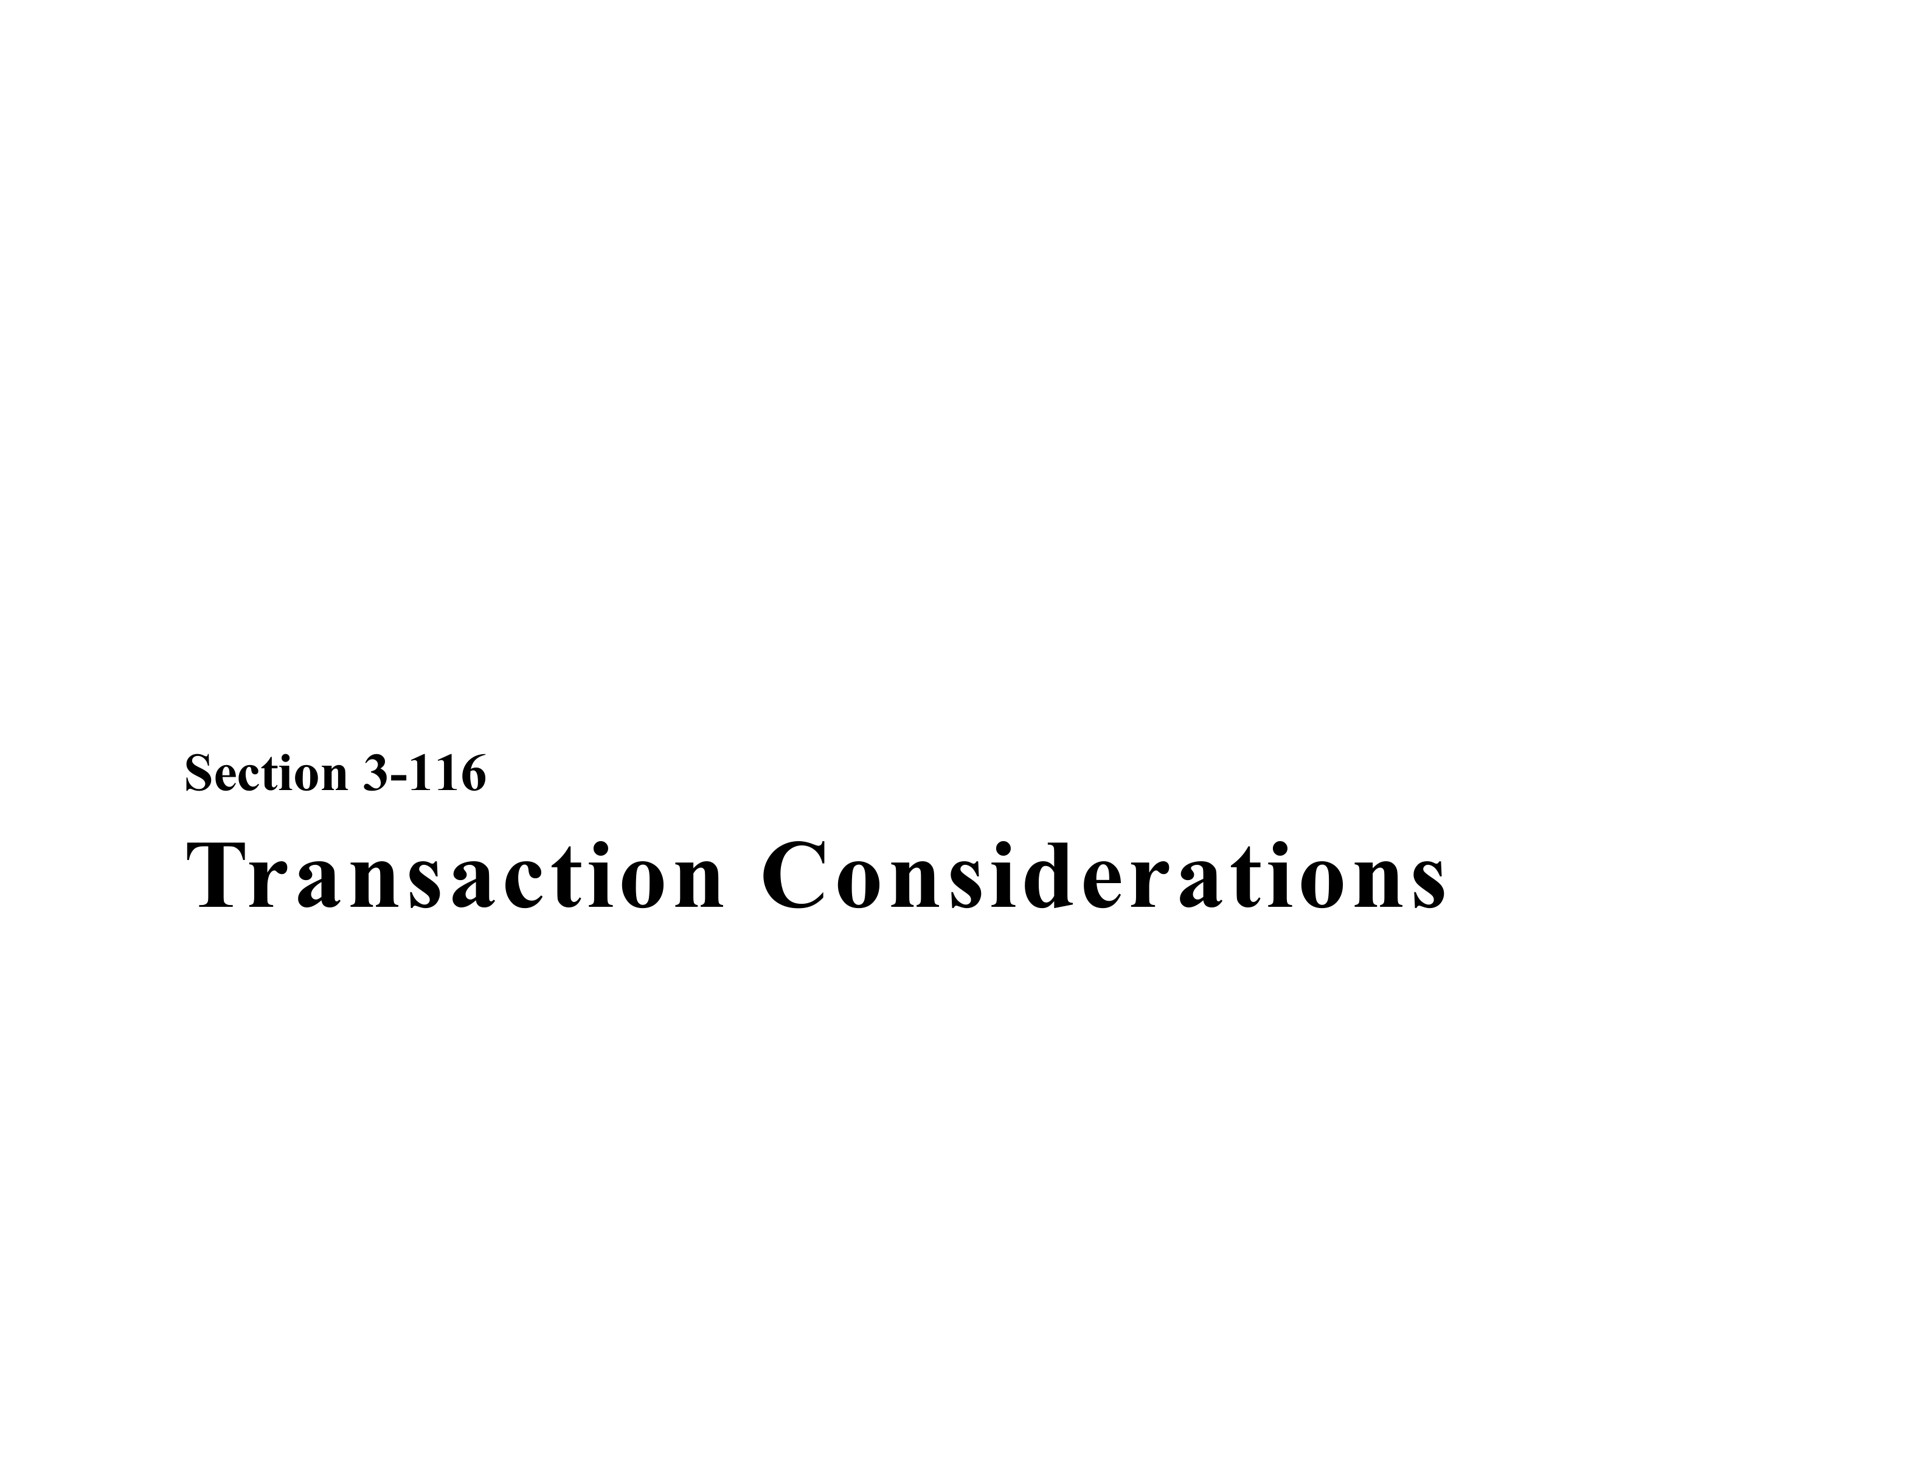 section transaction considerations | Bear Stearns